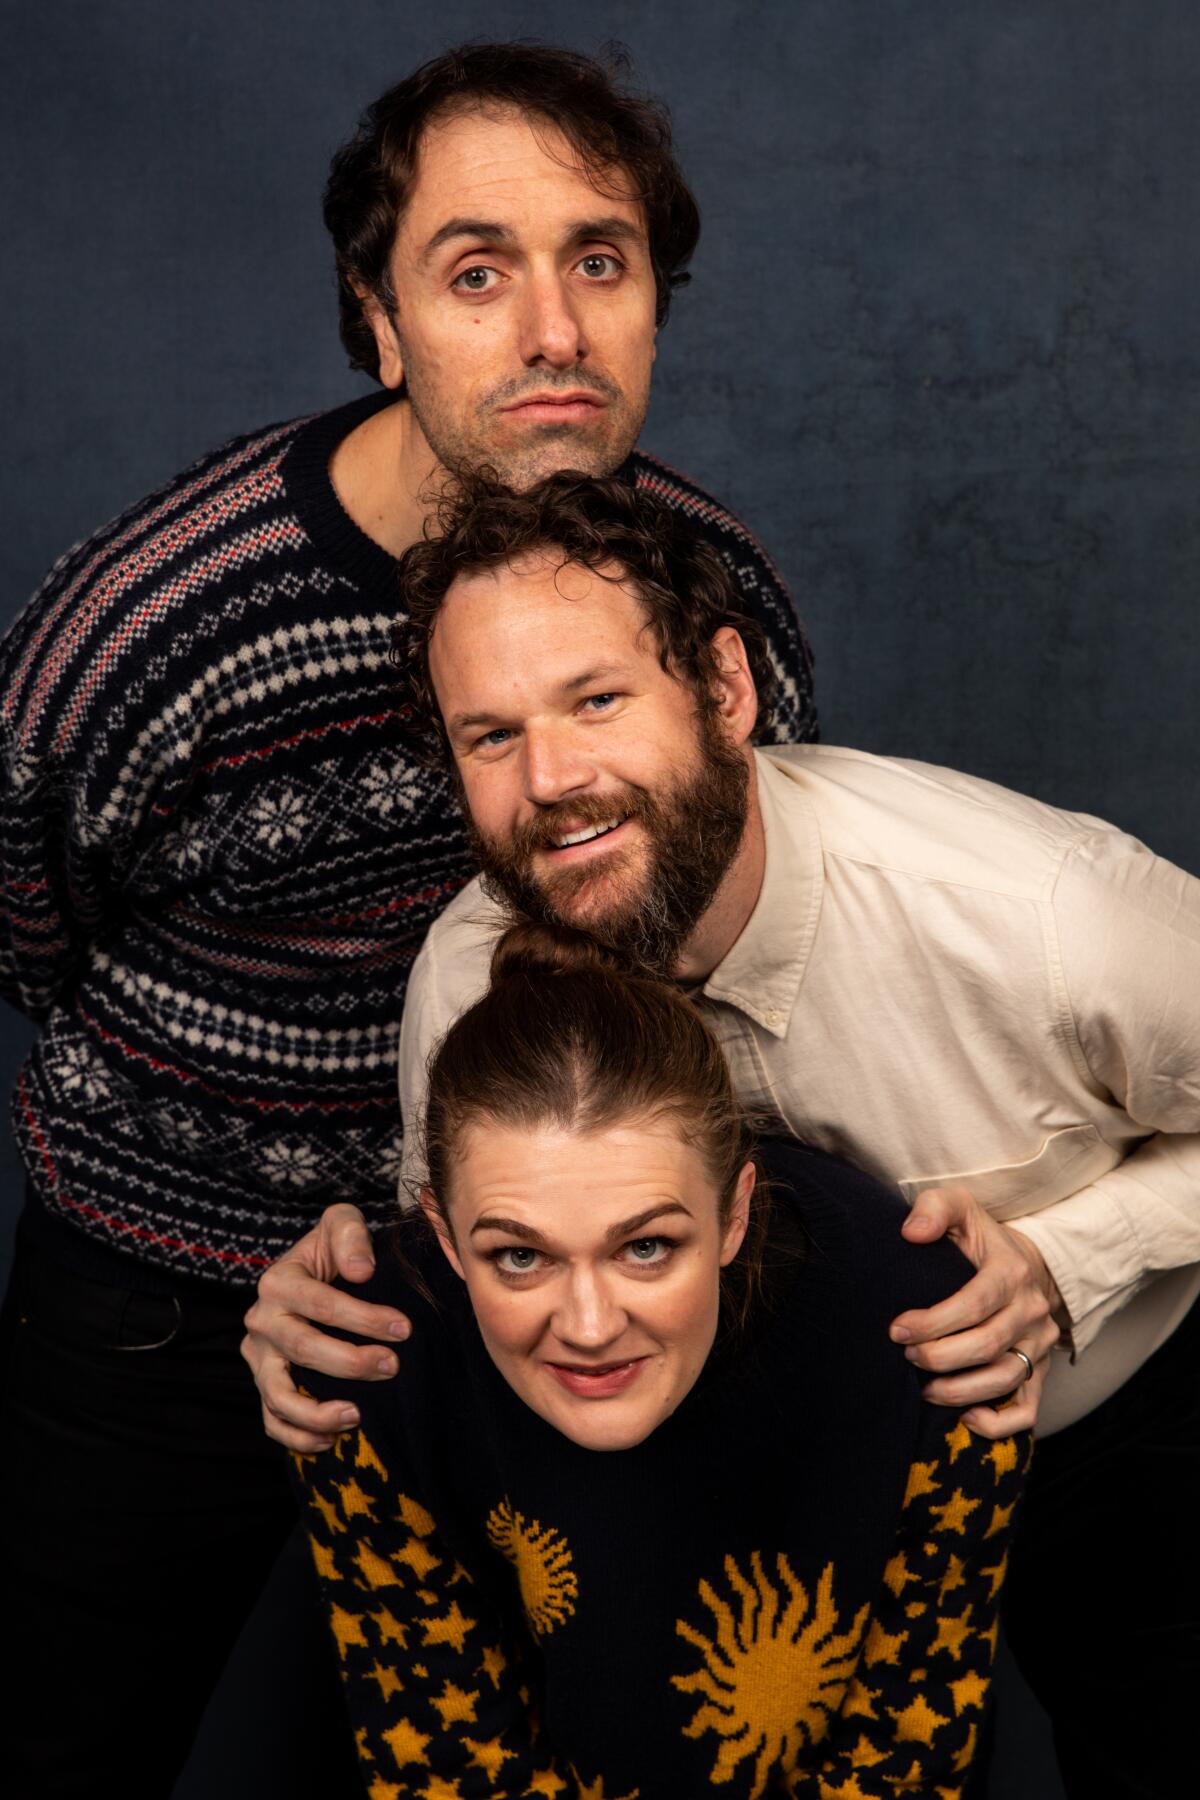 "The Climb" creators Michael Angelo Covino, Kyle Marvin and actress Gayle Rankin at the 2020 Sundance Film Festival